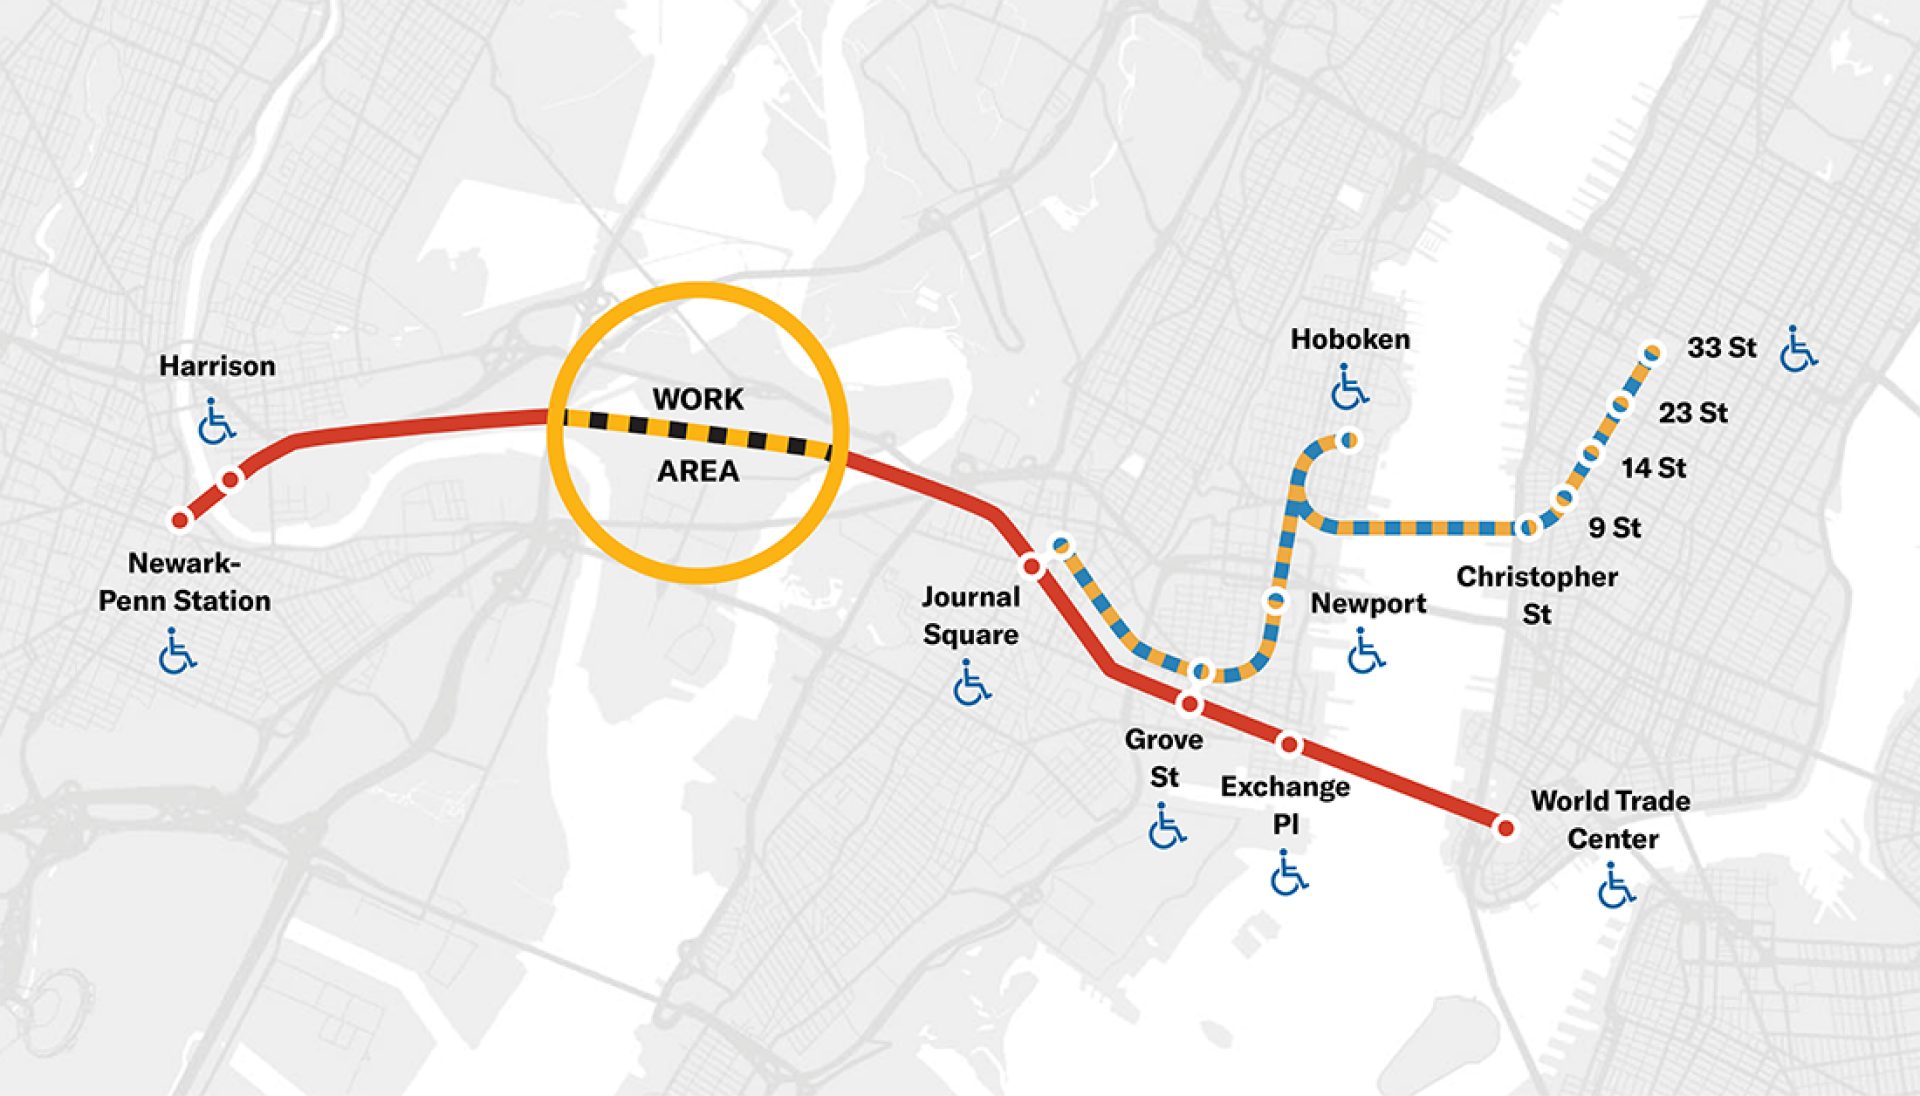 PATH is replacing 6,000 feet of track between Journal Square and Harrison stations